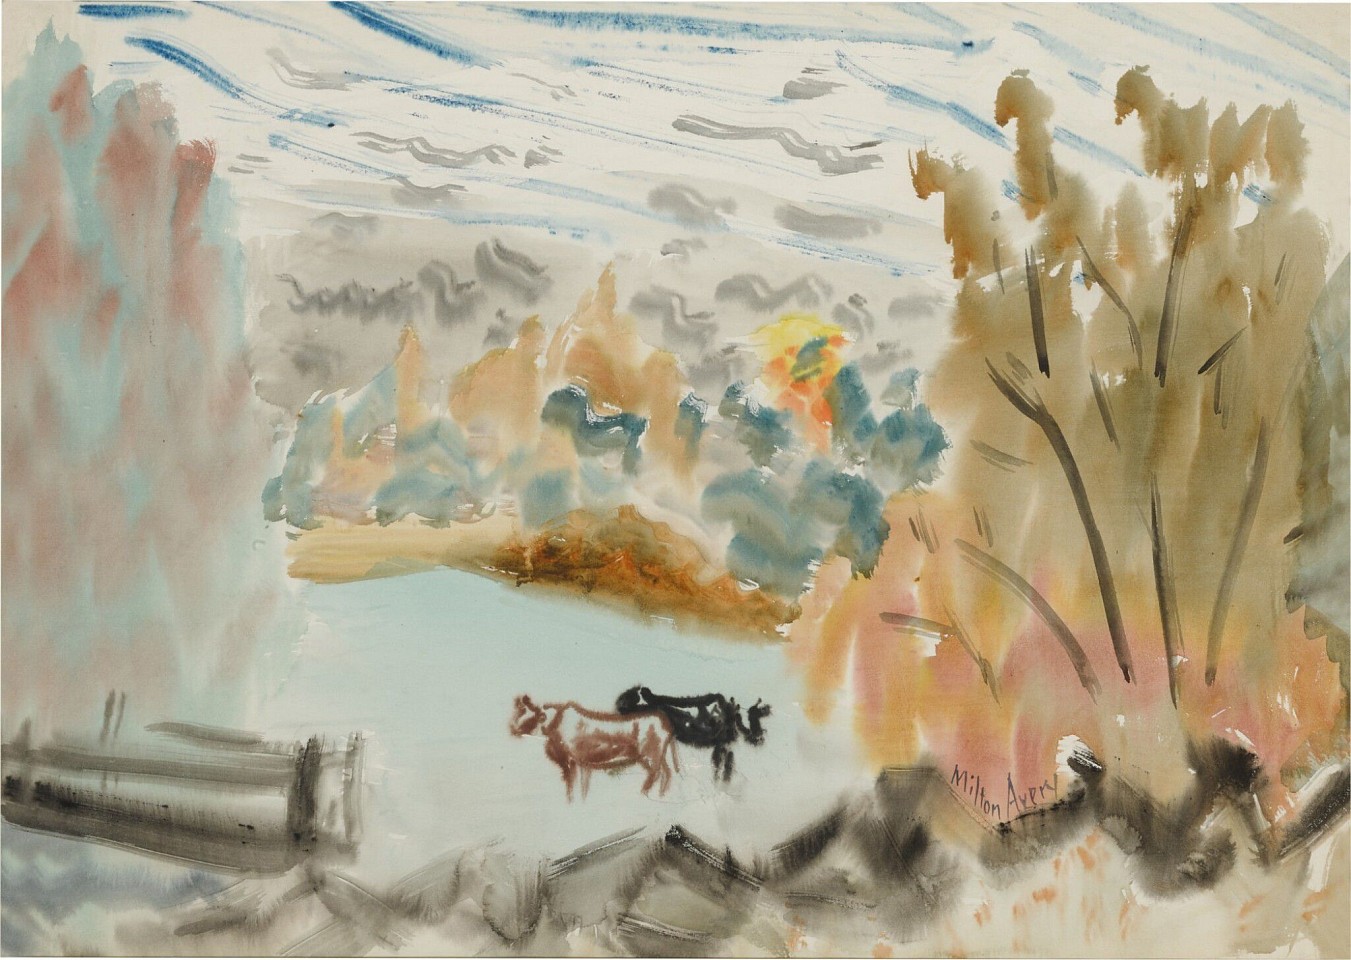 Milton Avery, Untitled (Cows in Autumn), 1941
watercolor on paper, 22 3/4 x 33 3/4 in. (57.8 x 85.7 cm)
MA221002